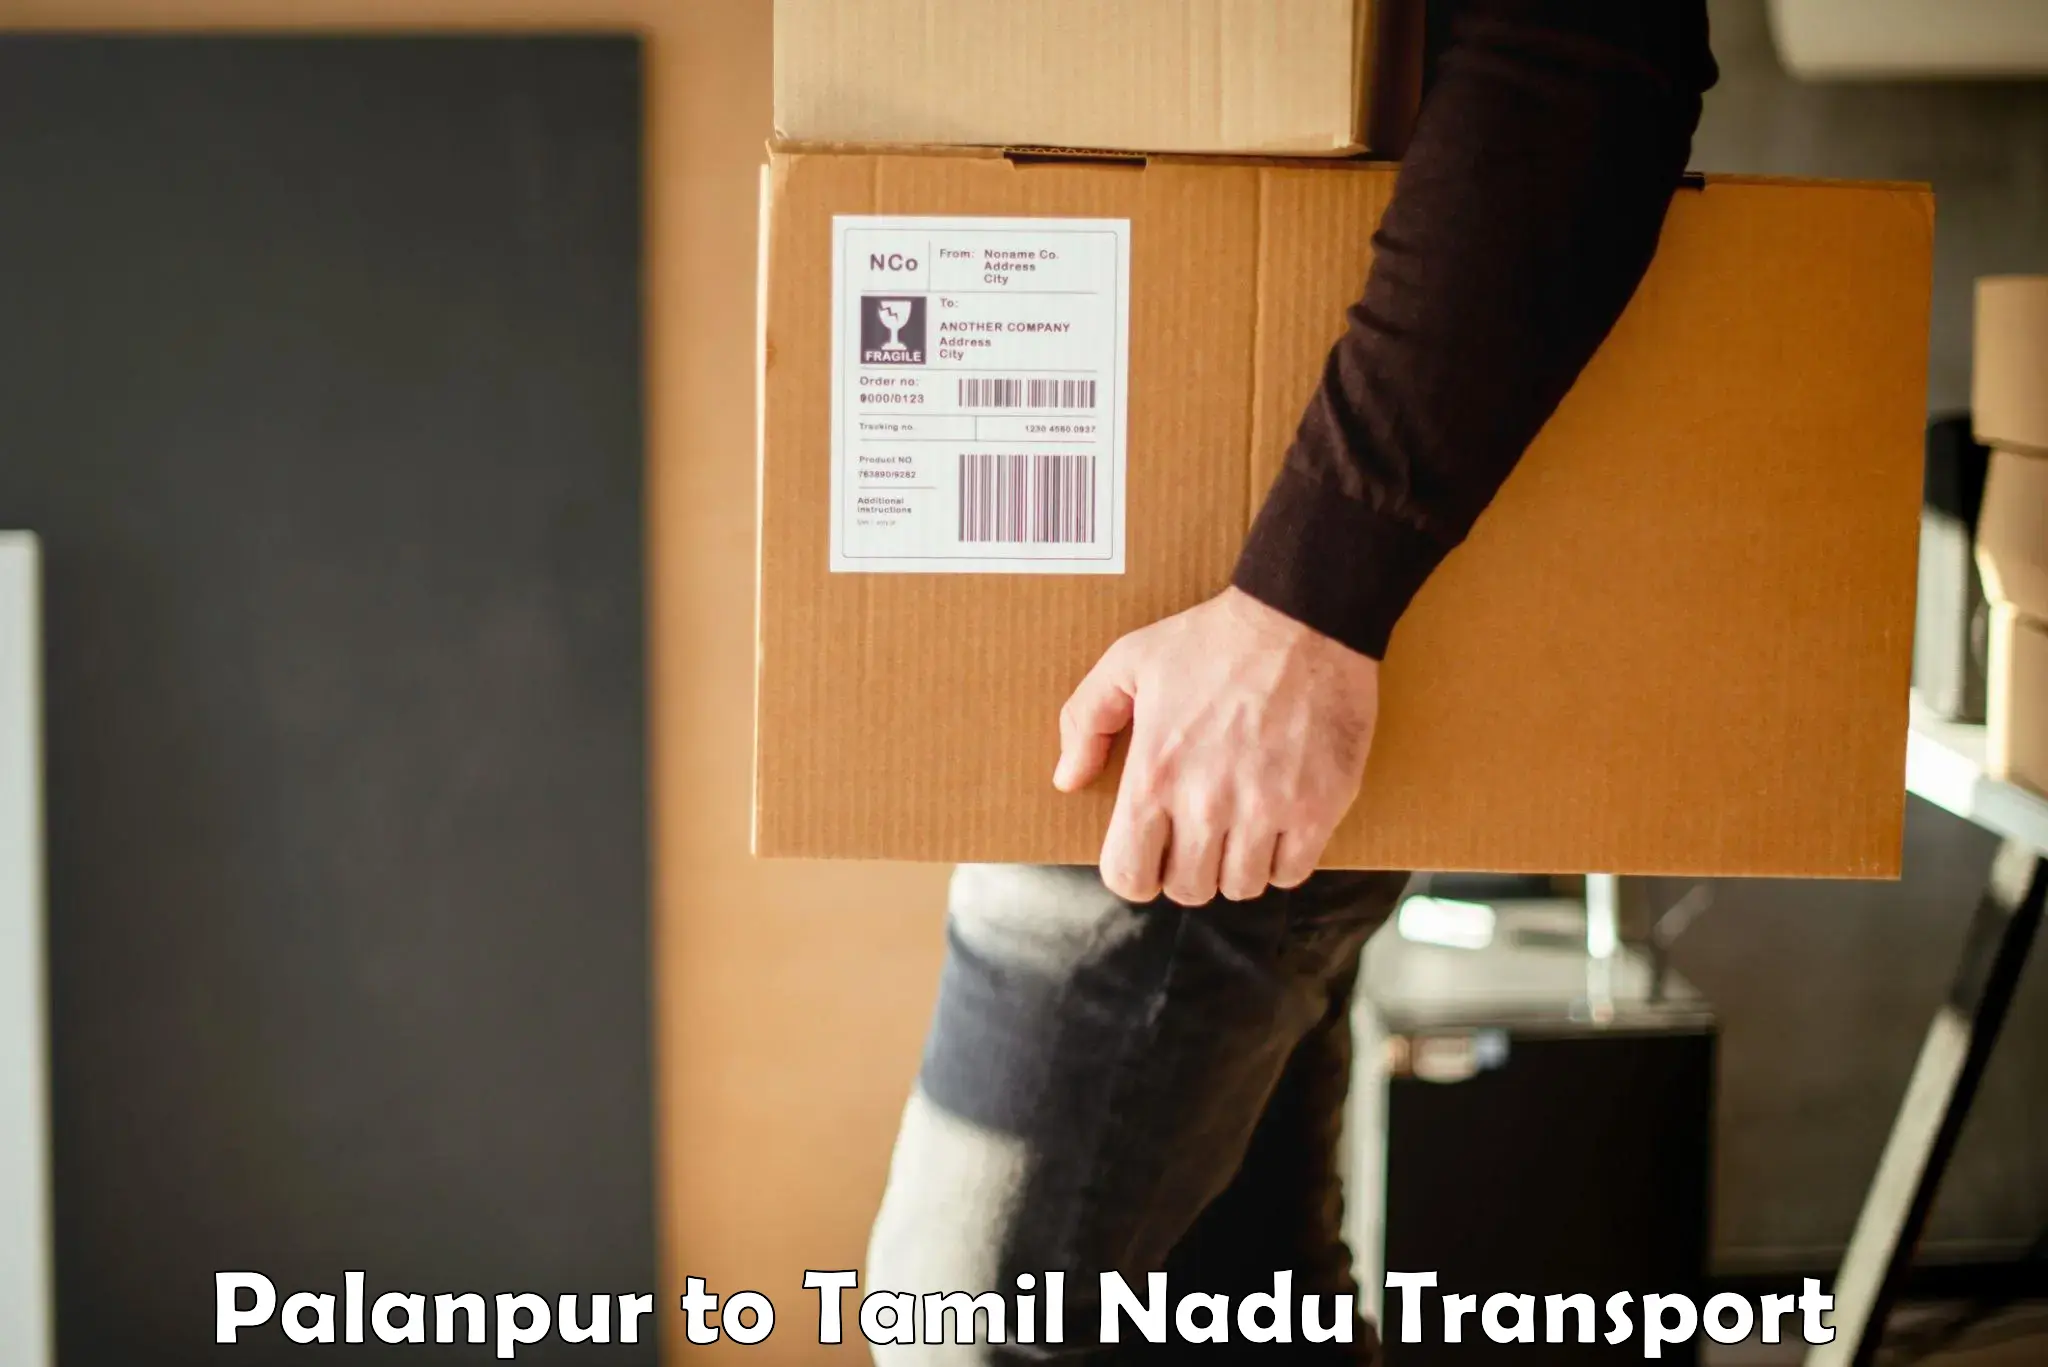 Furniture transport service Palanpur to Vellore Institute of Technology